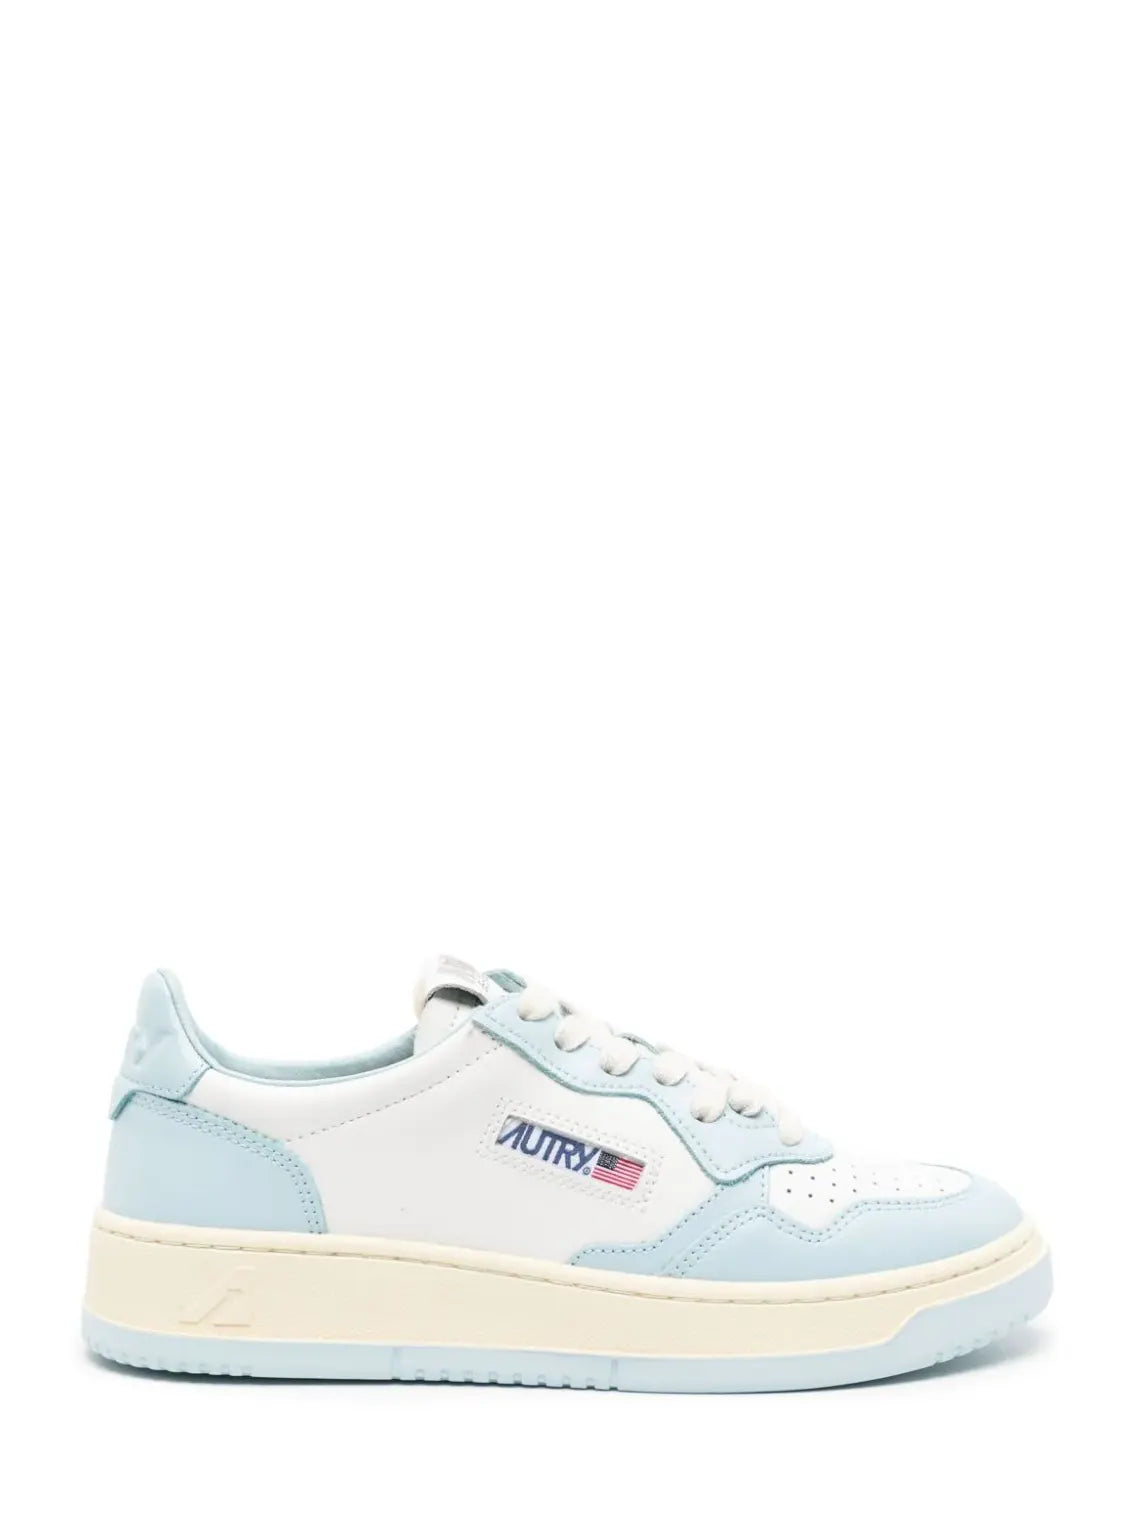 Medalist low sneakers, white/blue